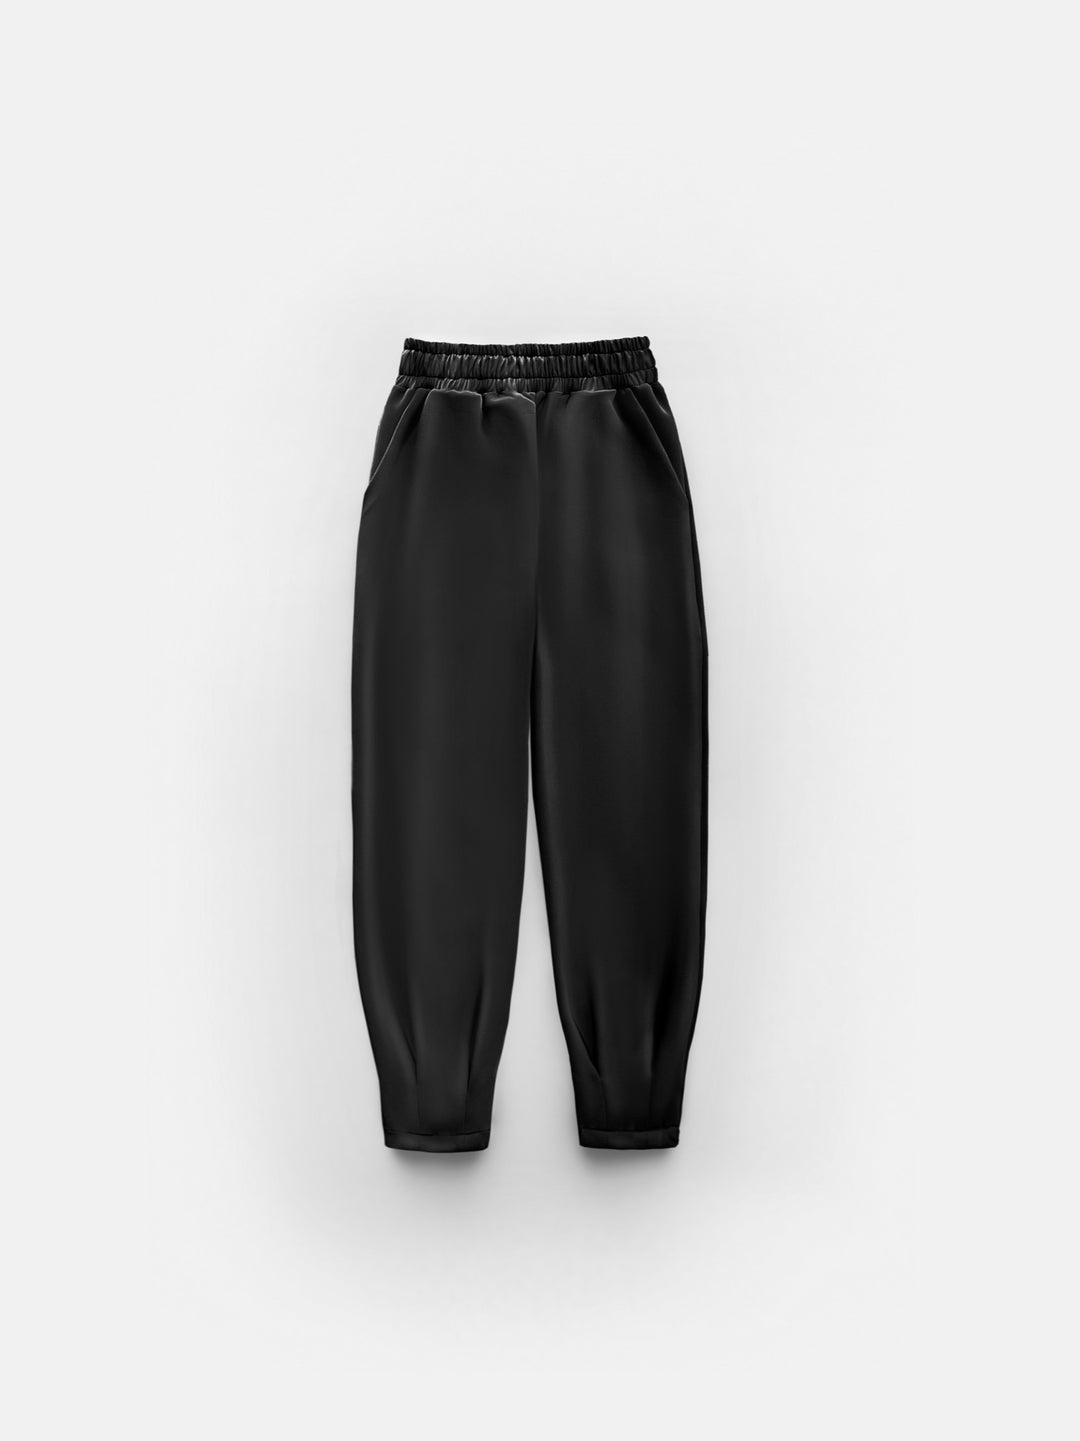 Diver Fabric Chic Trousers - Black